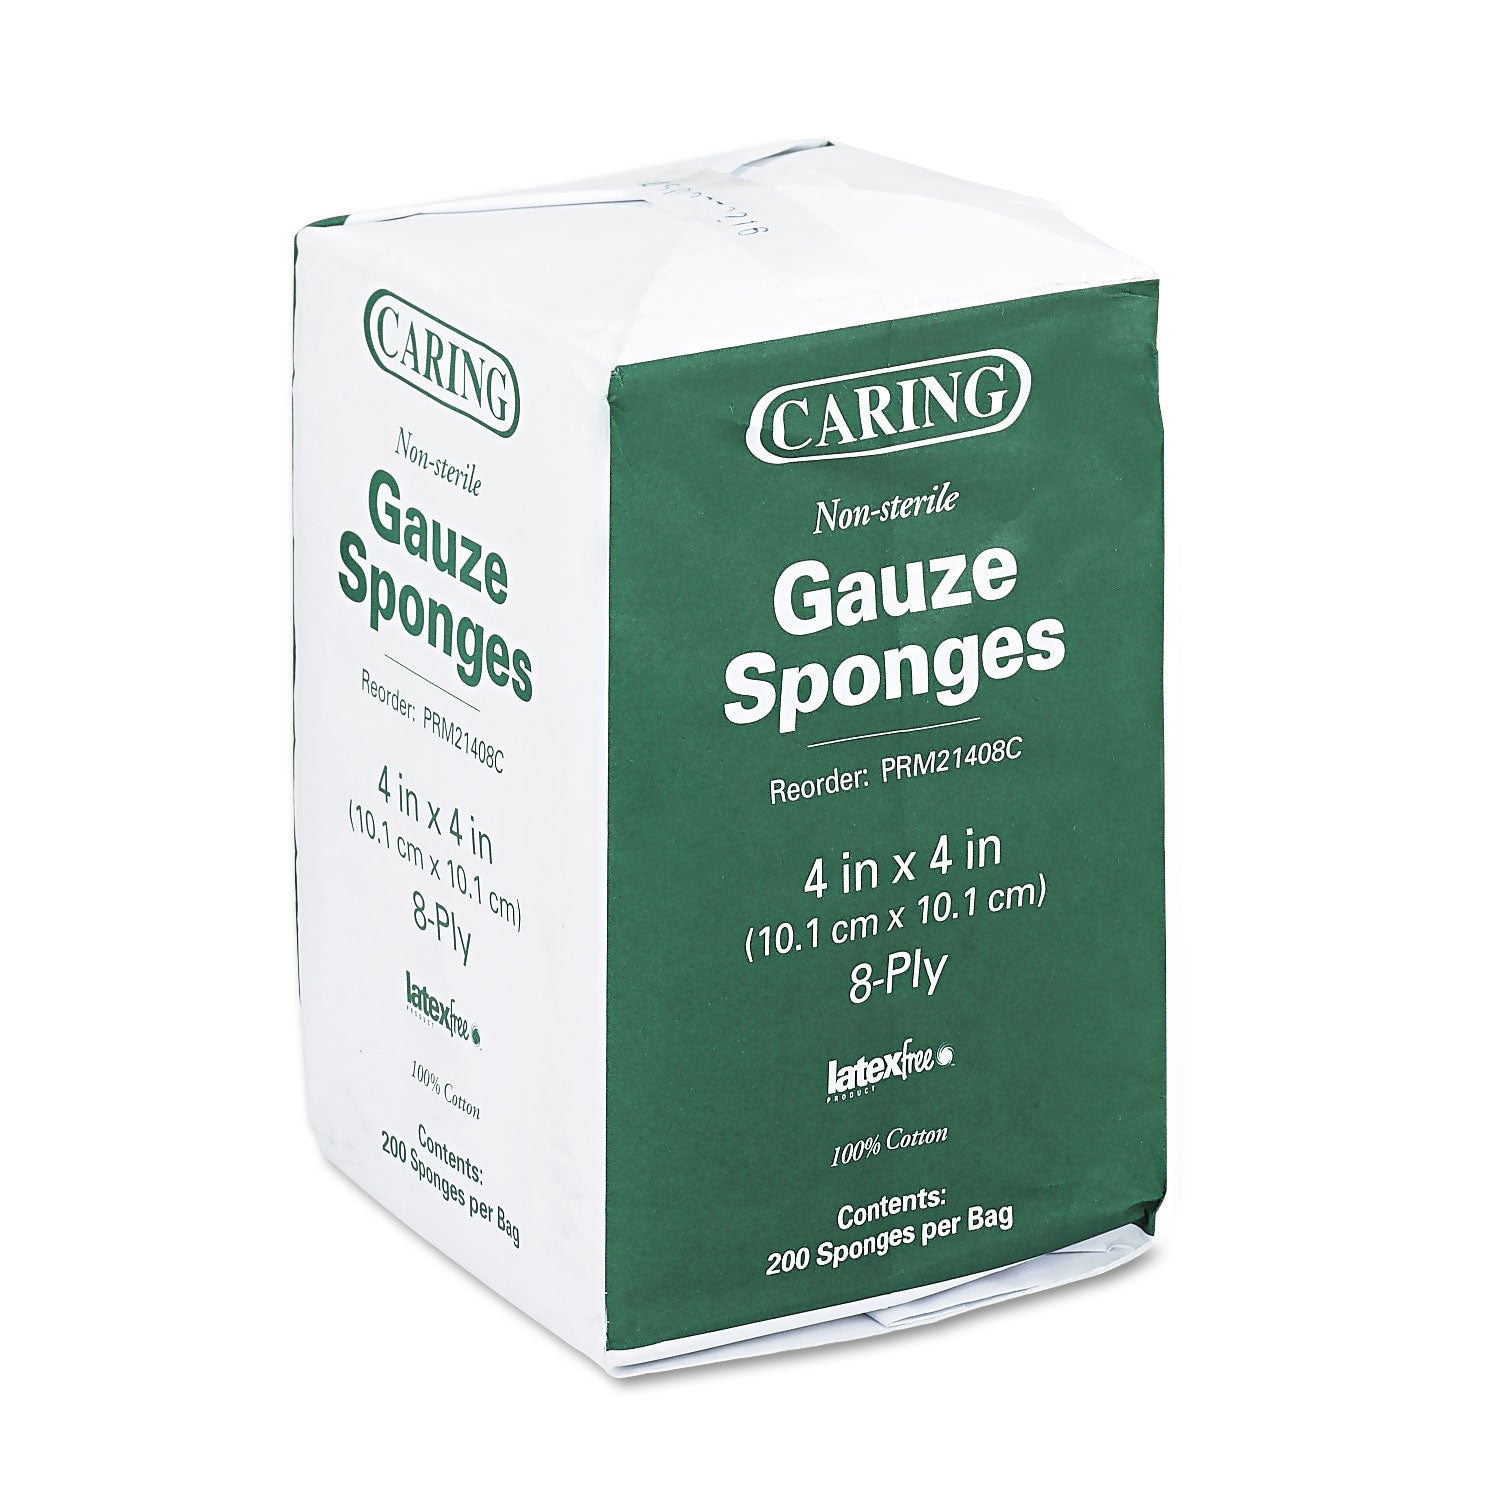 Caring Woven Gauze Sponges, Non-Sterile, 8-Ply, 4 x 4, 200/Pack - 